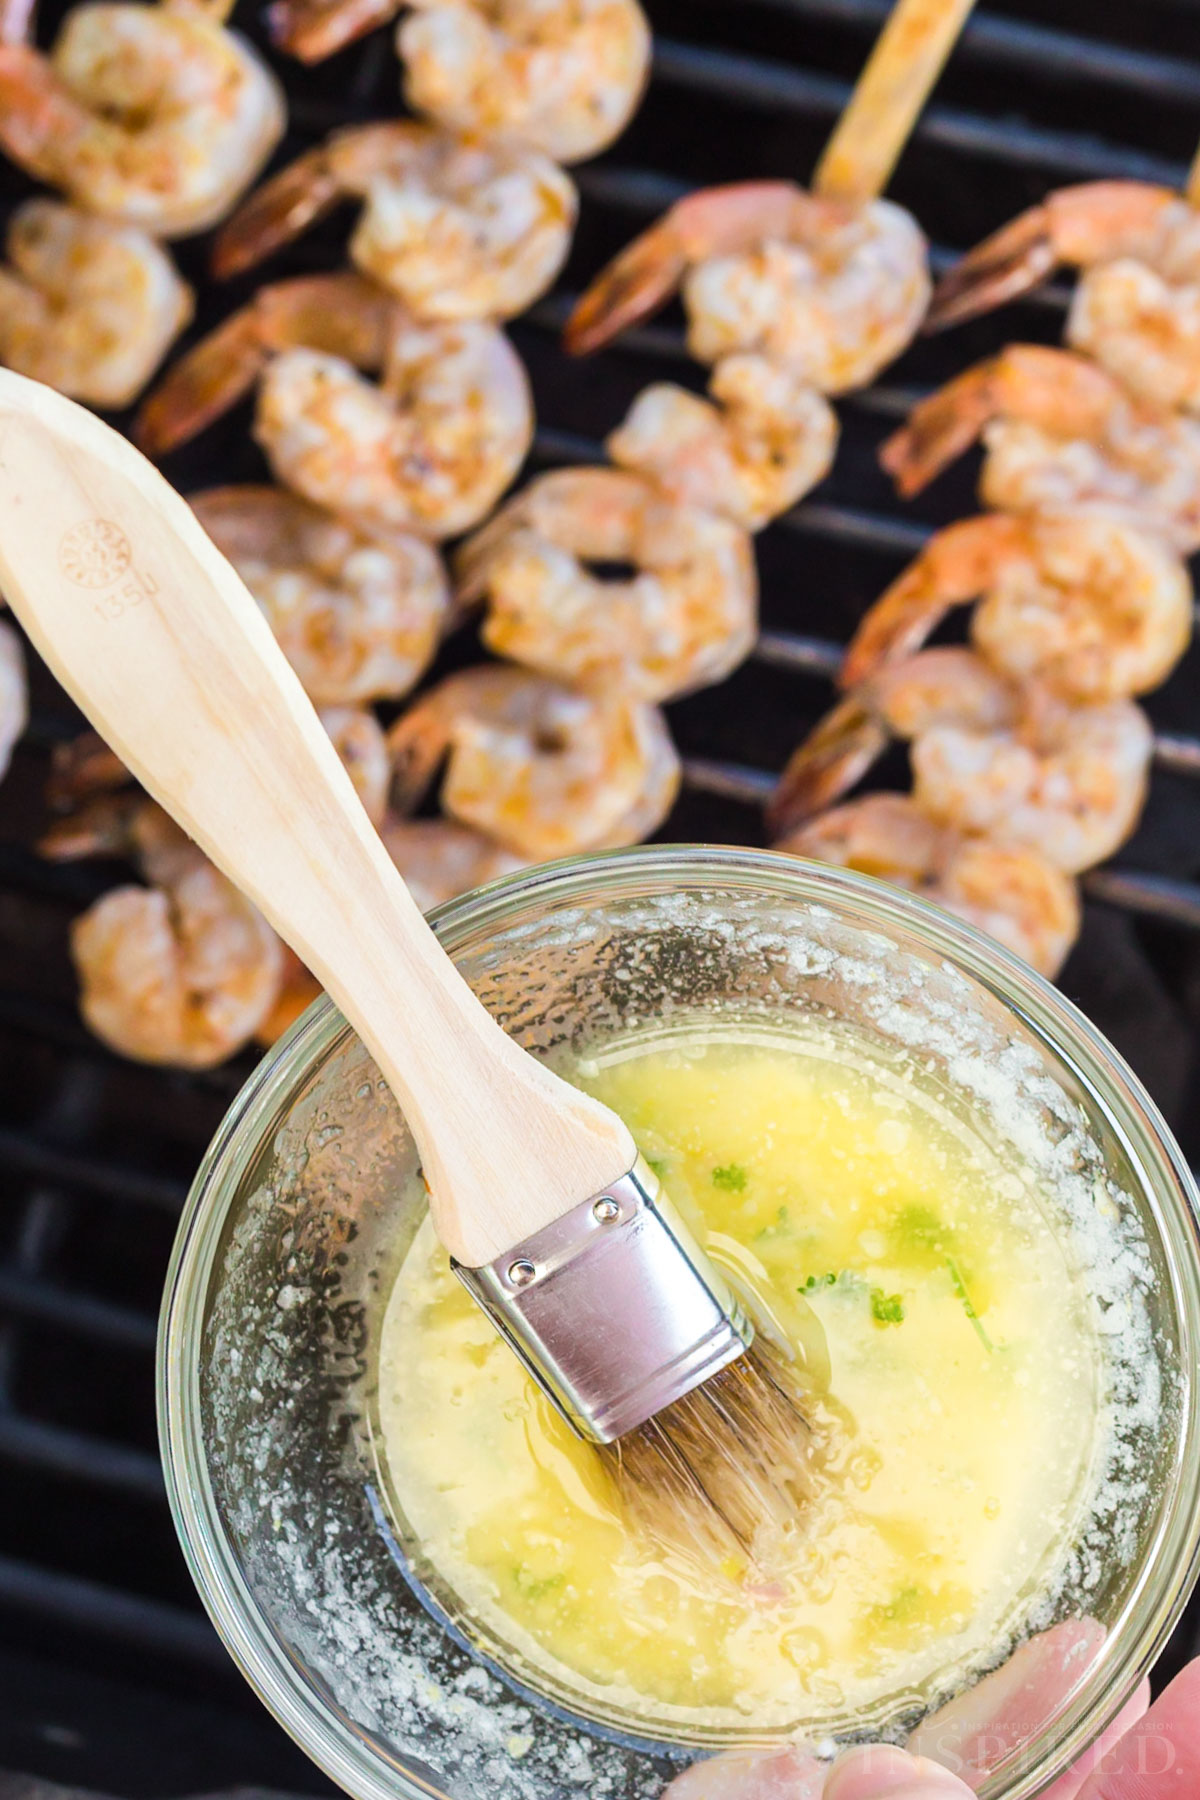 Bowl of garlic butter sauce and basting brush held over grill with shrimp skewers on it.